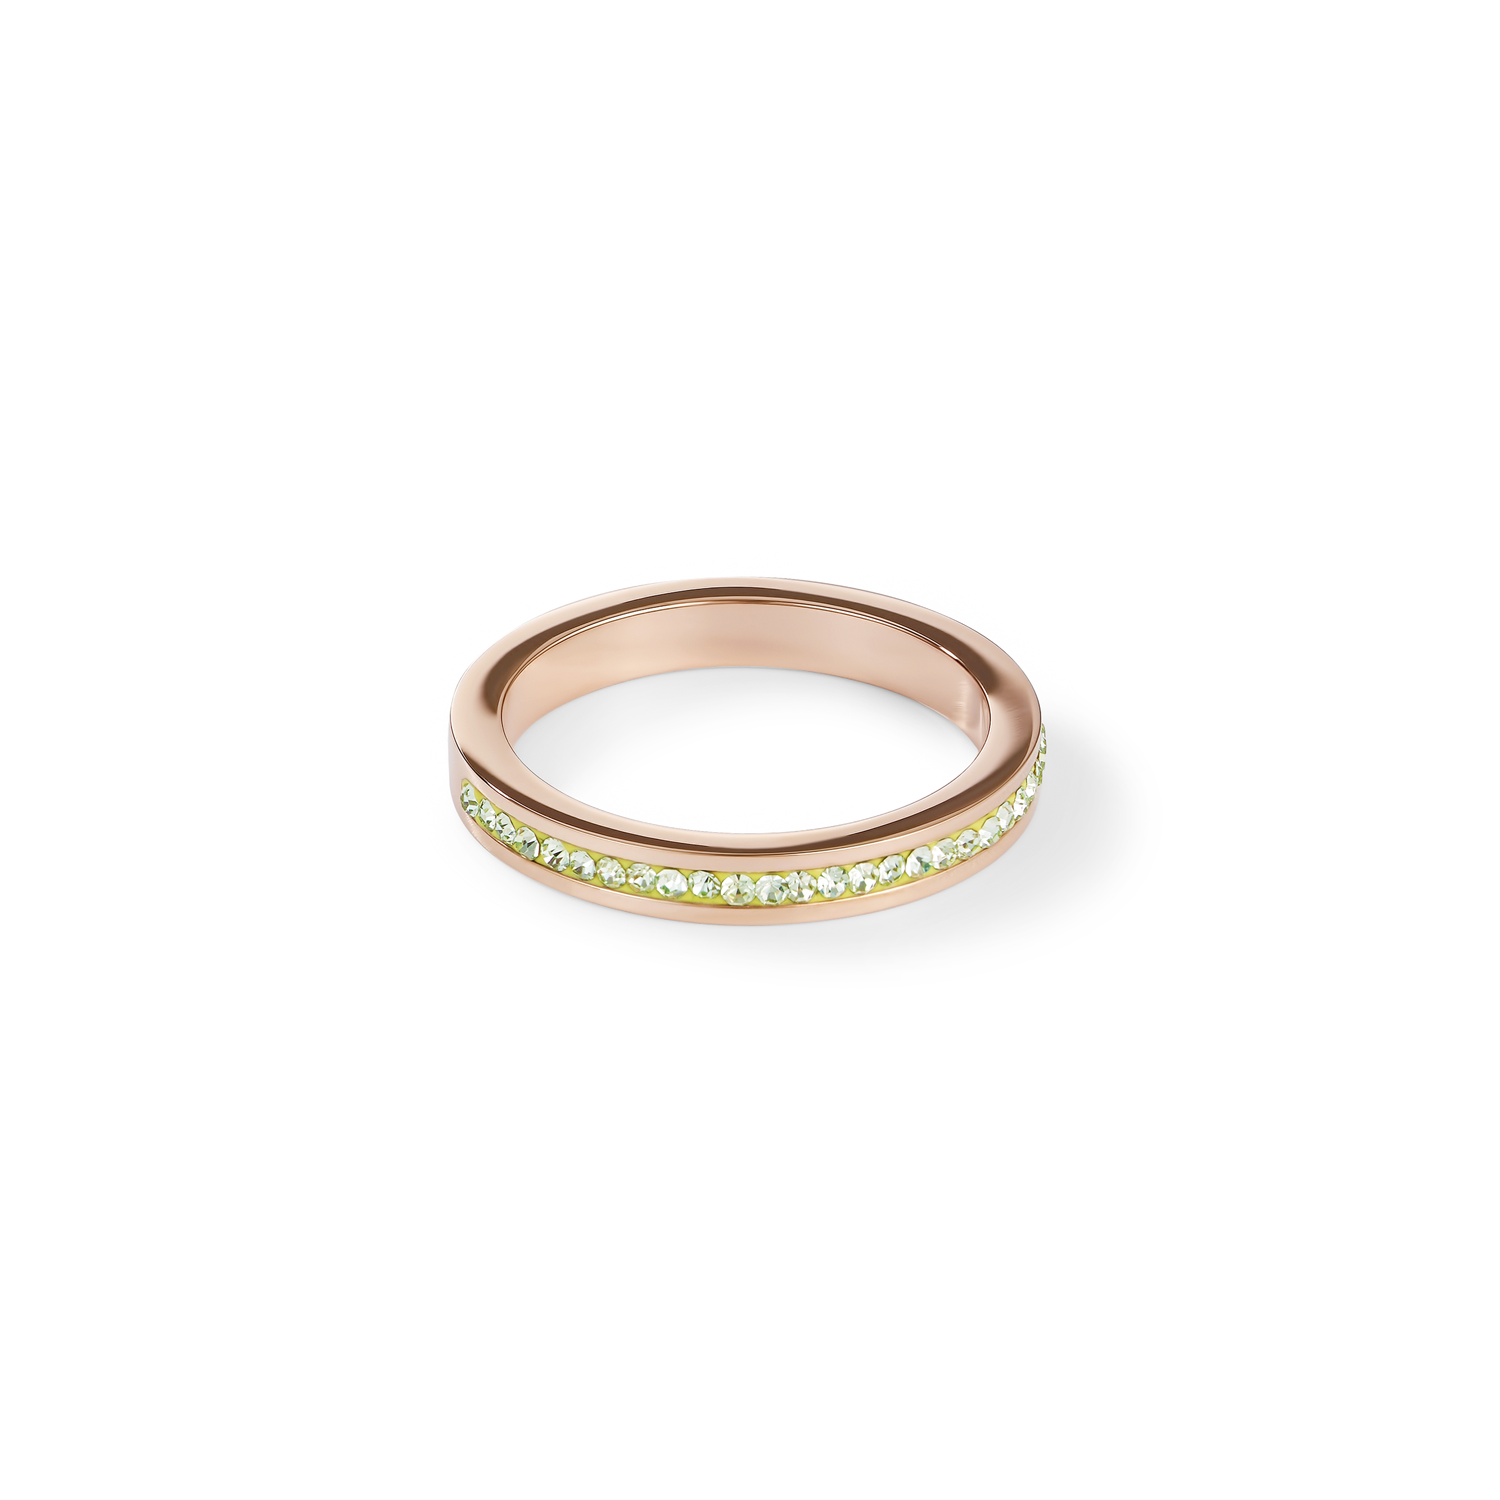 Ring slim stainless steel rose gold & crystals pavé green